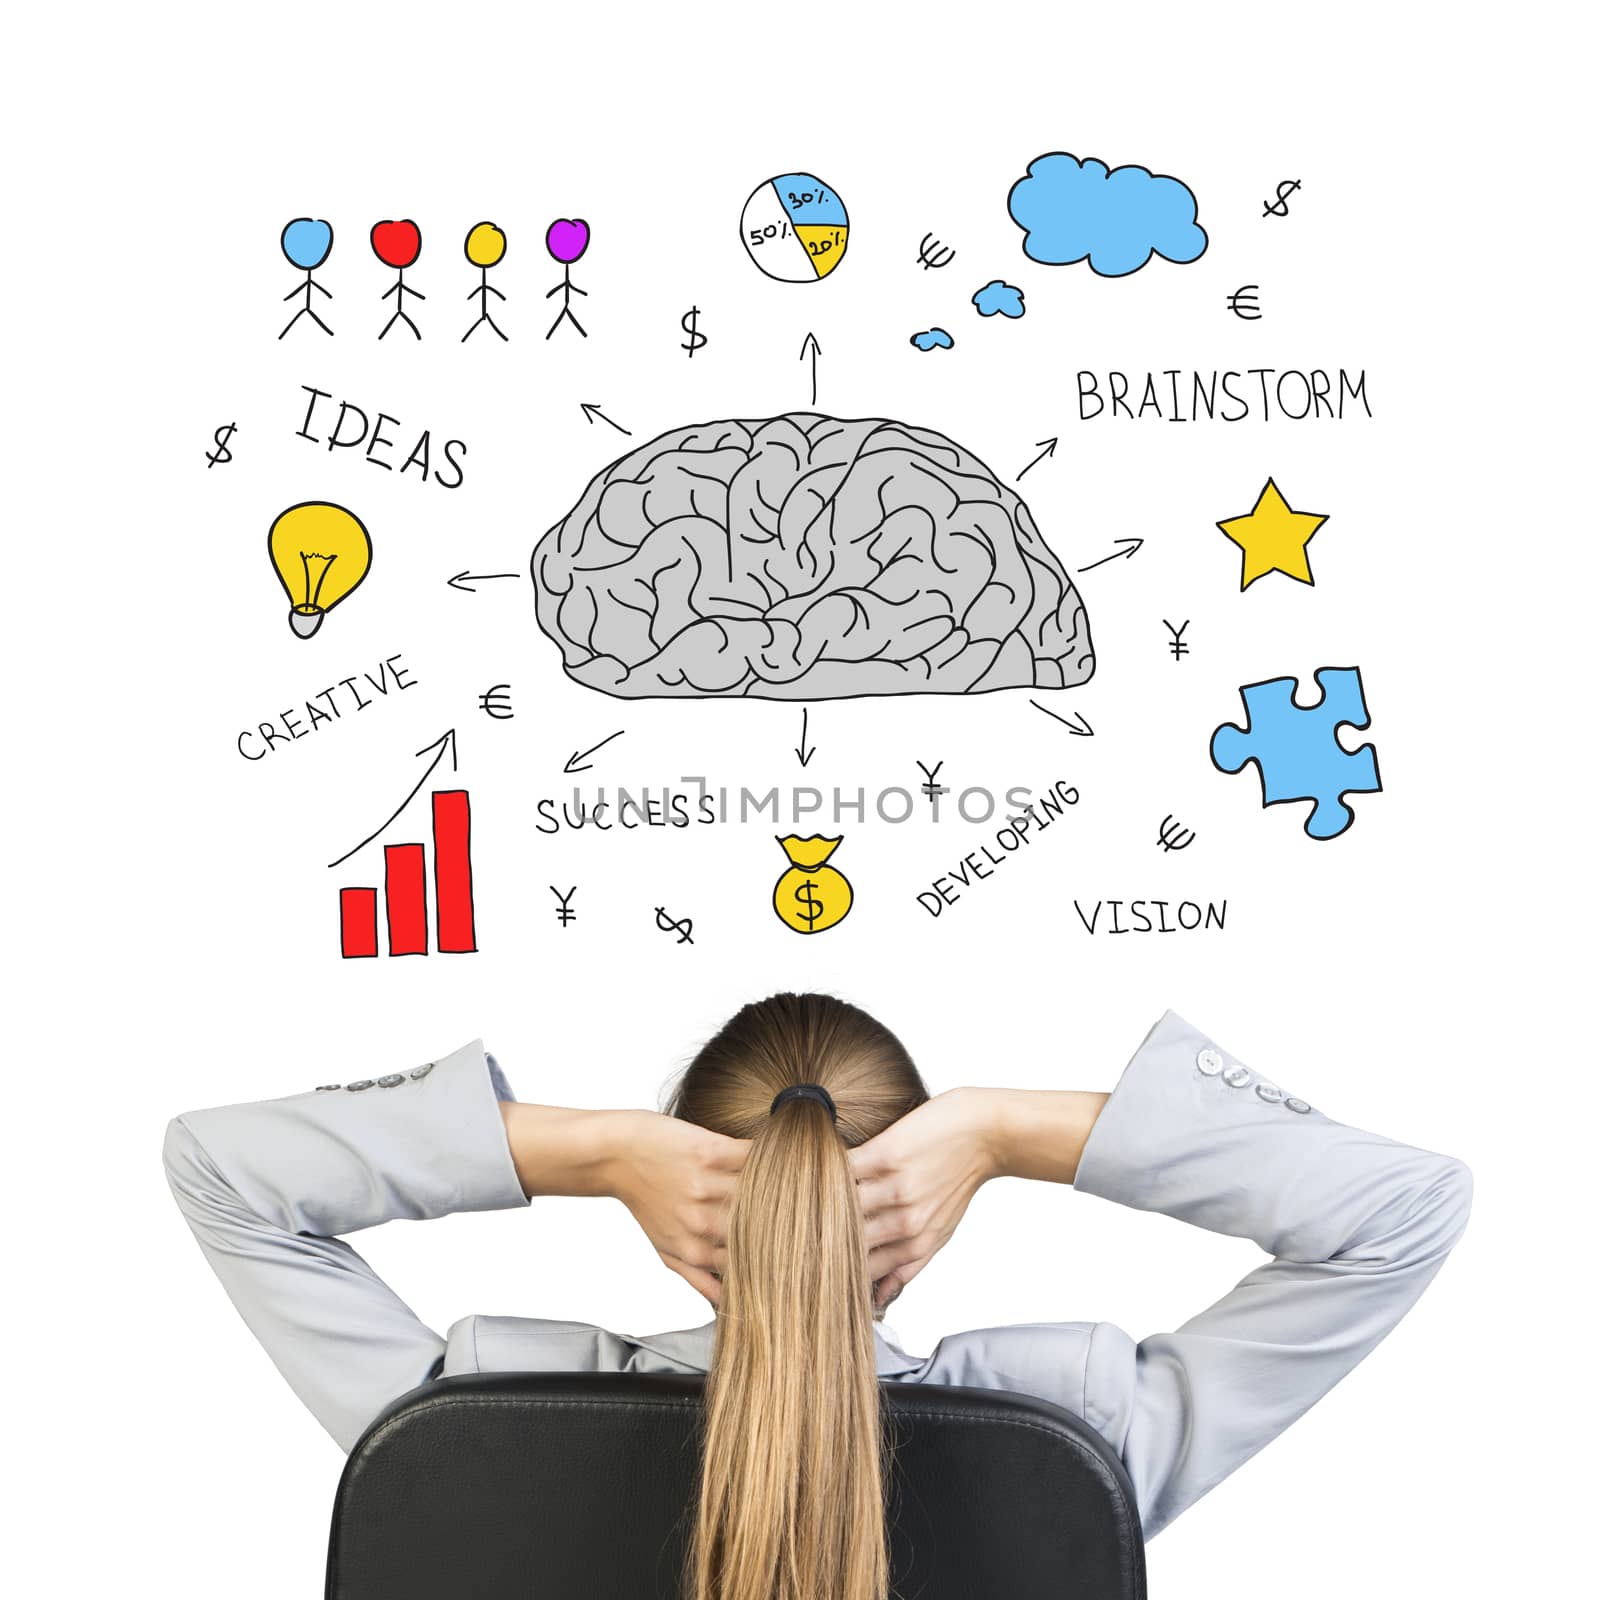 Businesswoman sitting on office chair with hands clasped behind her head, in front of drawing expressing idea of success through creative thinking, on white background